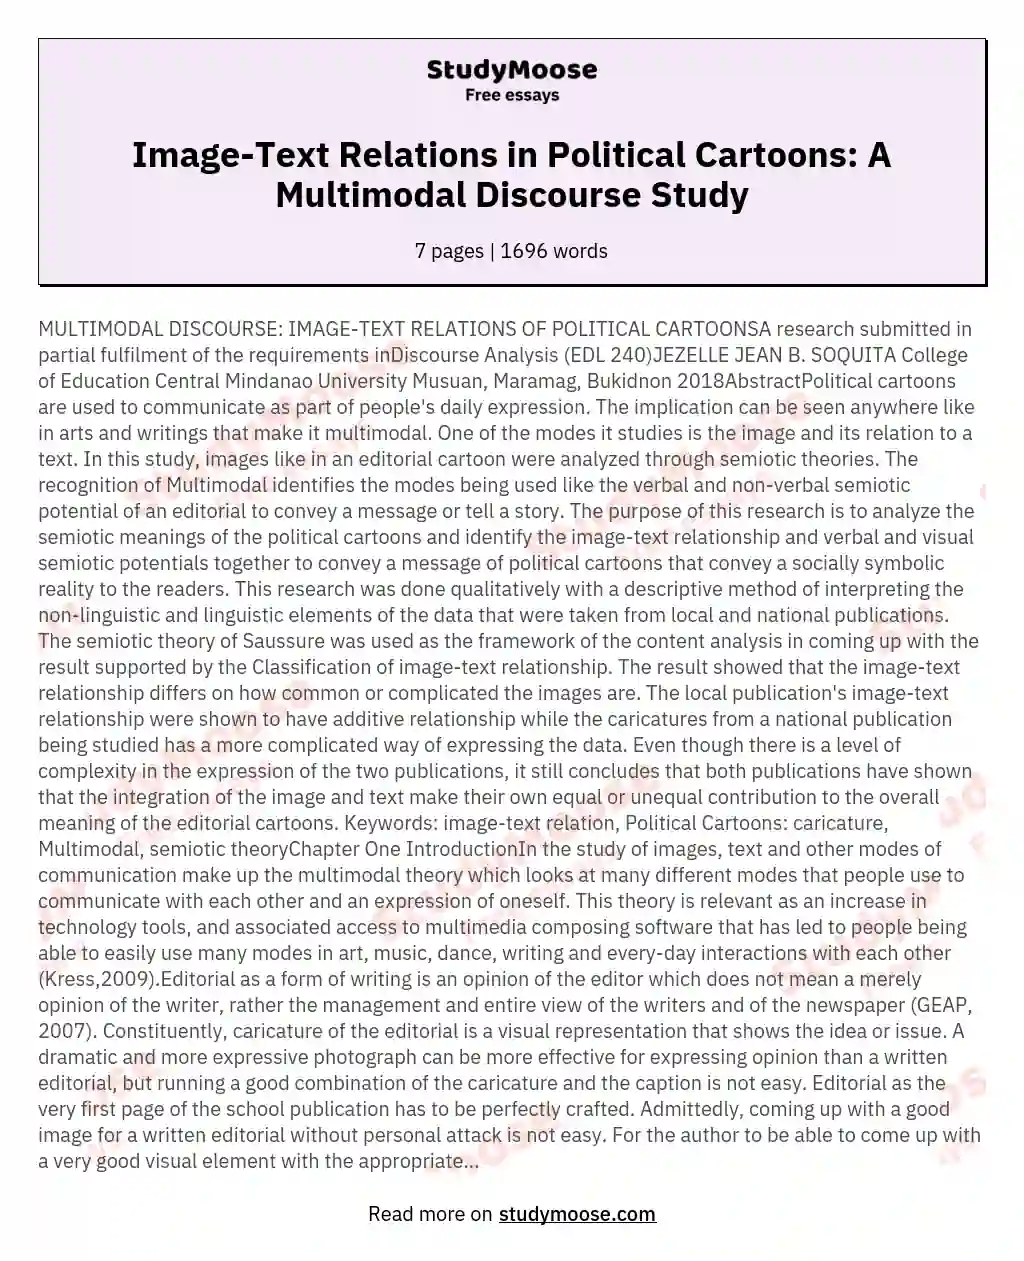 MULTIMODAL DISCOURSE IMAGETEXT RELATIONS OF POLITICAL CARTOONSA research submitted in partial fulfilment